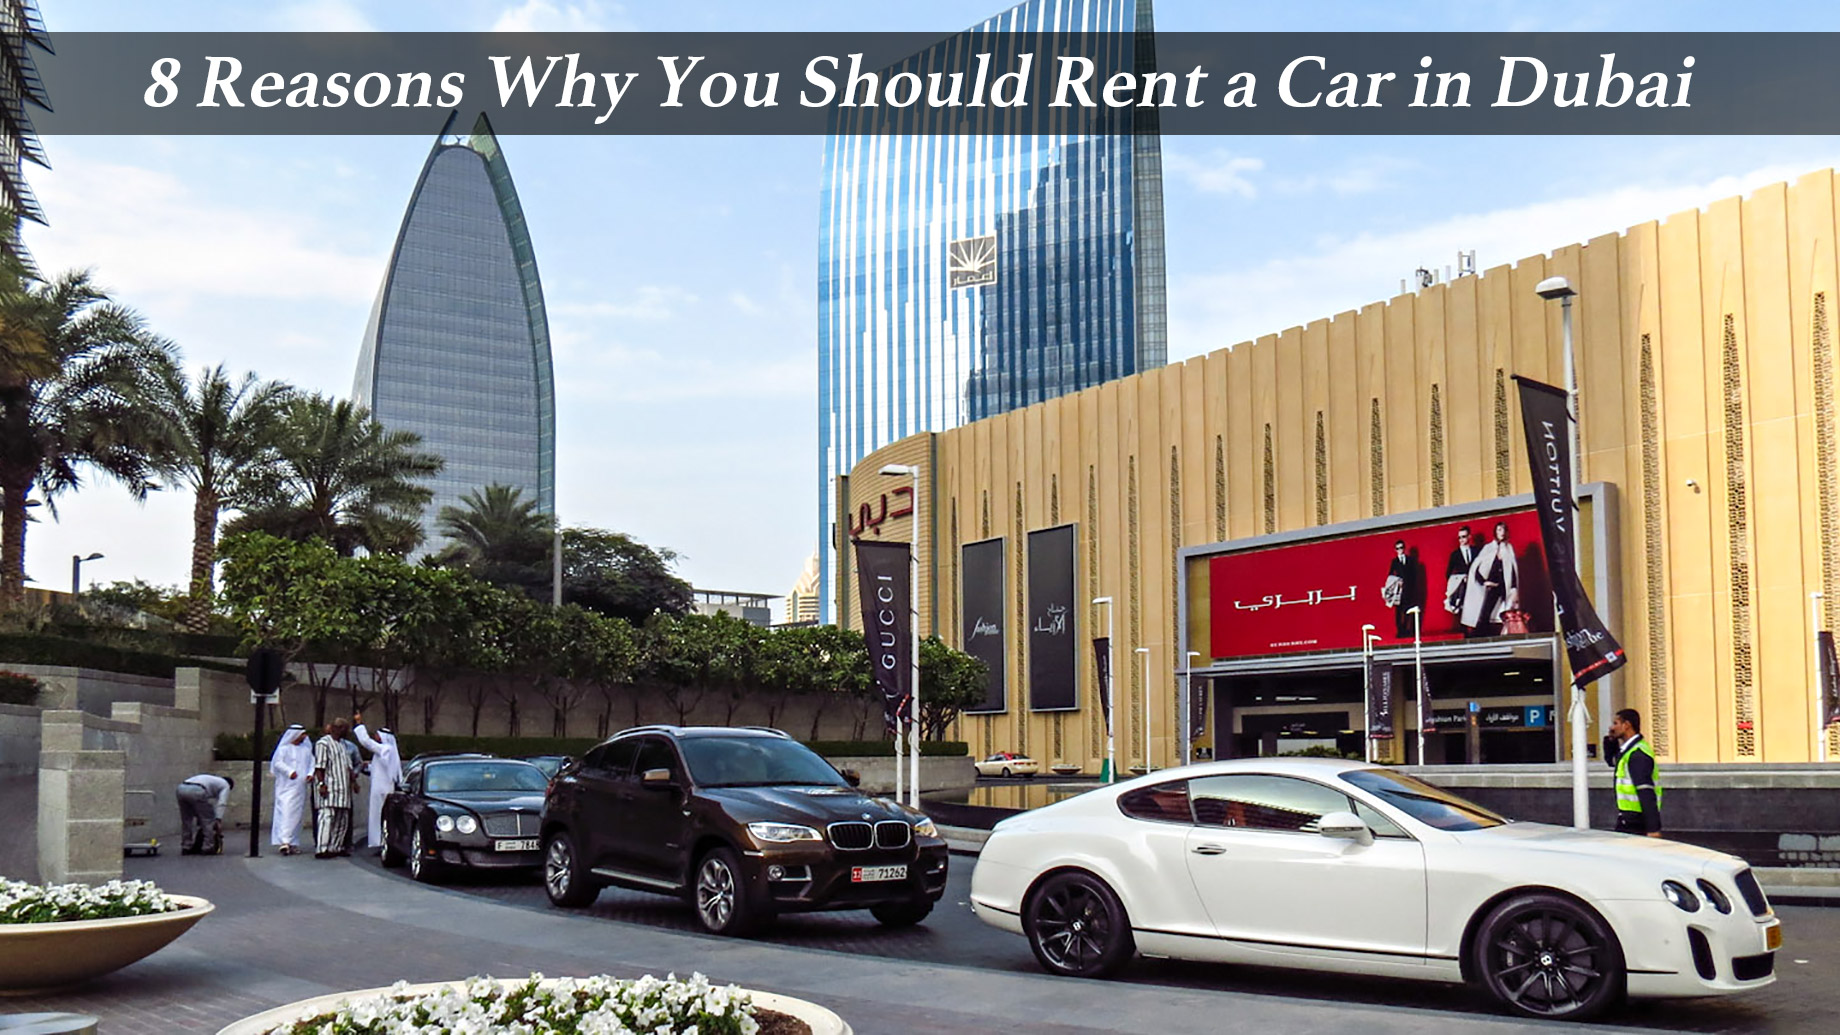 8 Reasons Why You Should Rent a Car in Dubai